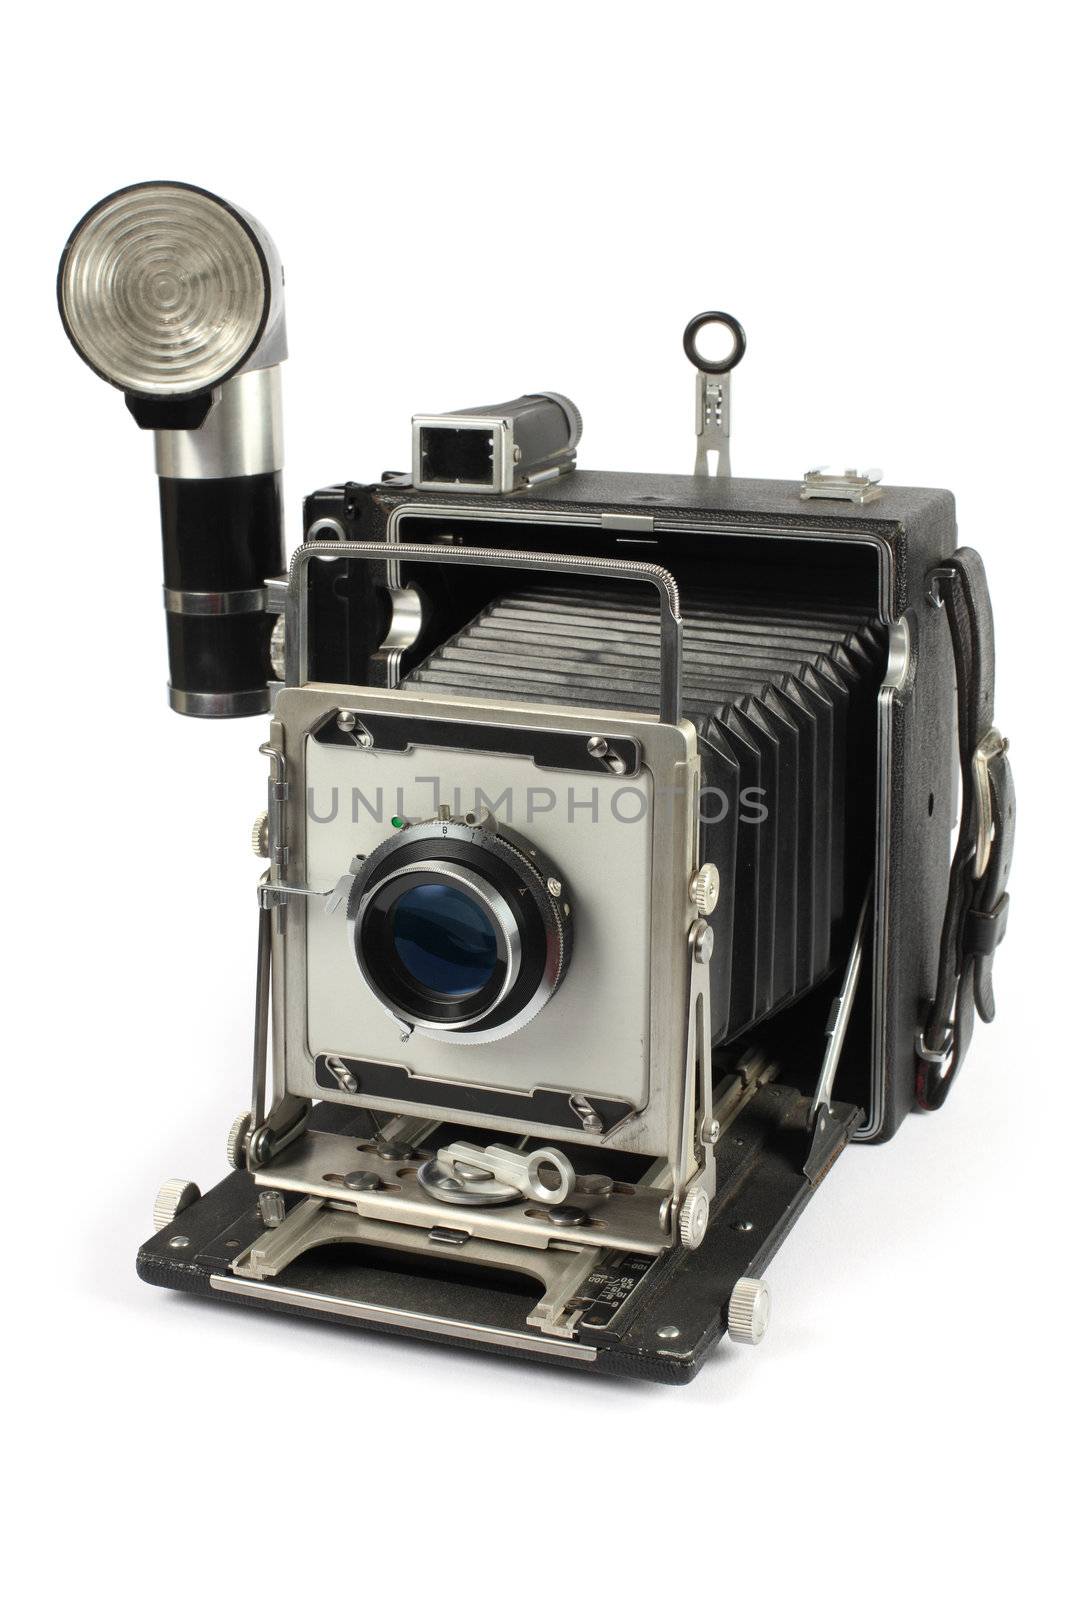 Photo of an antique 4x6-inch camera isolated on white background. Slight shadow visible around bottom of camera.